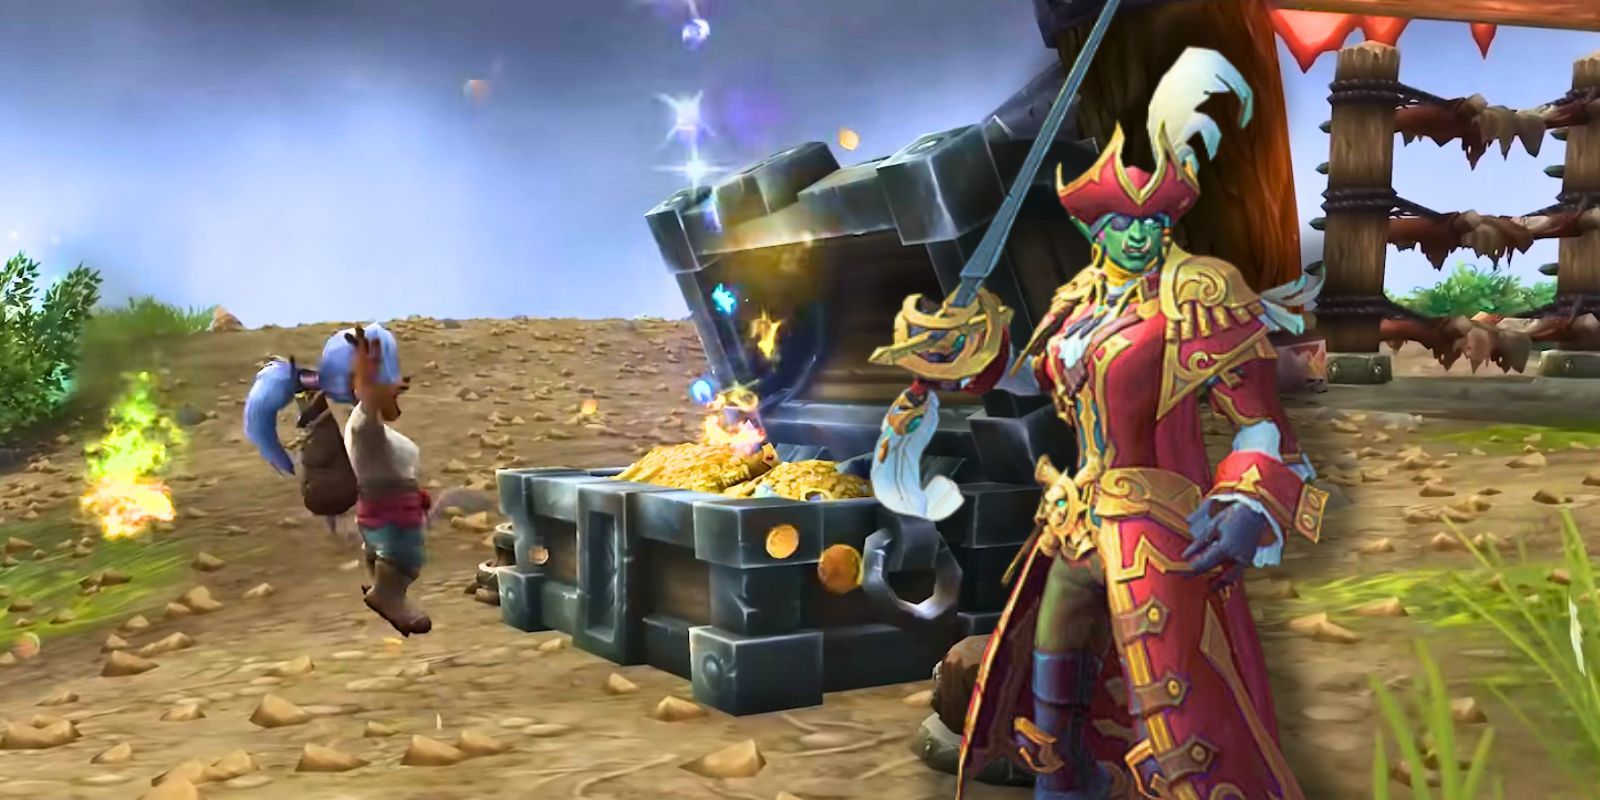 10 Things In World Of Warcraft's Plunderstorm Update That Make WoW Worth  Revisiting